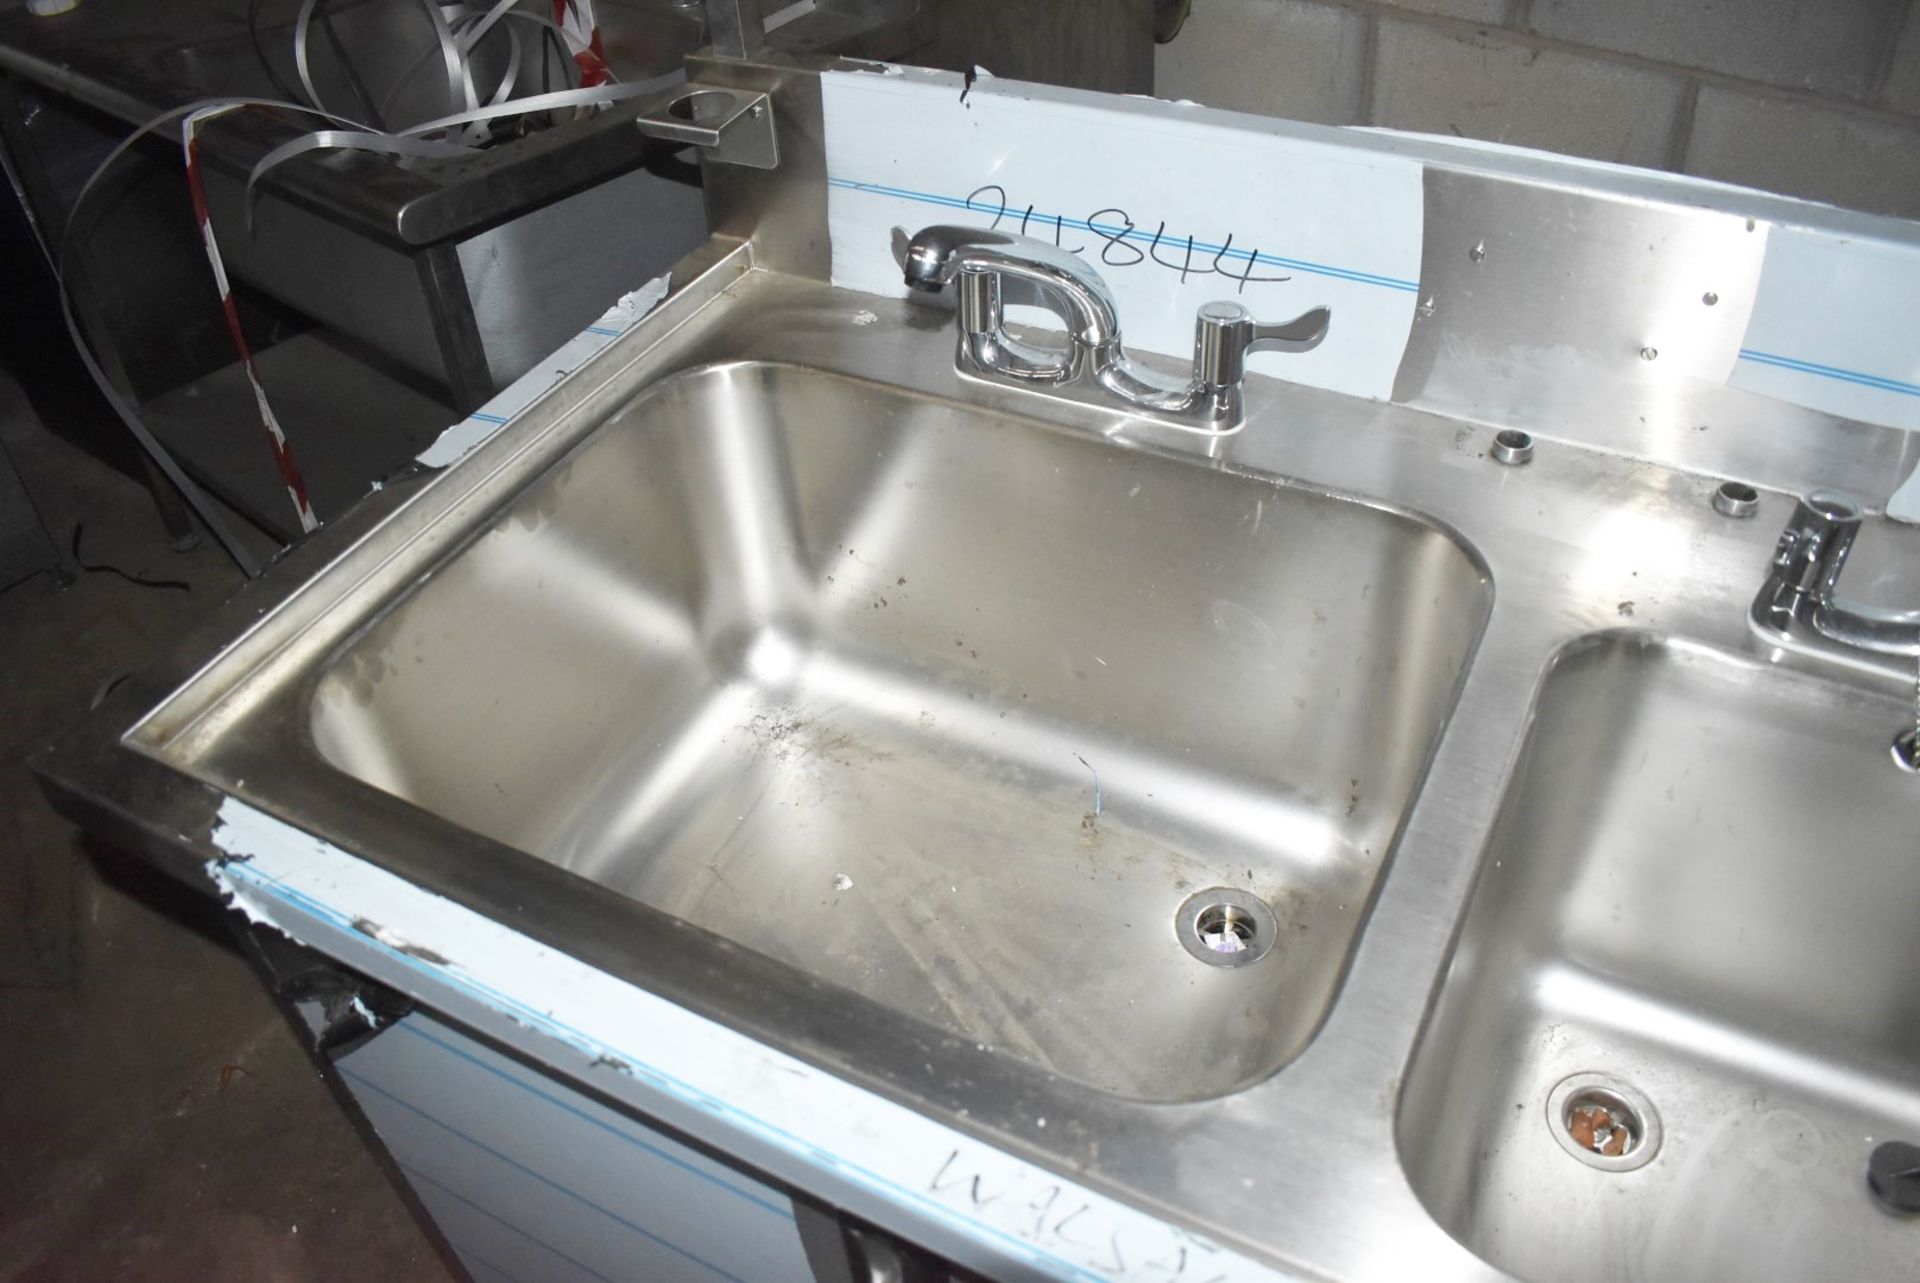 1 x Stainless Steel Wash Station Cabinet With Two Large Sink Bowls, Mixer Tap and Overhead Drying - Image 4 of 12